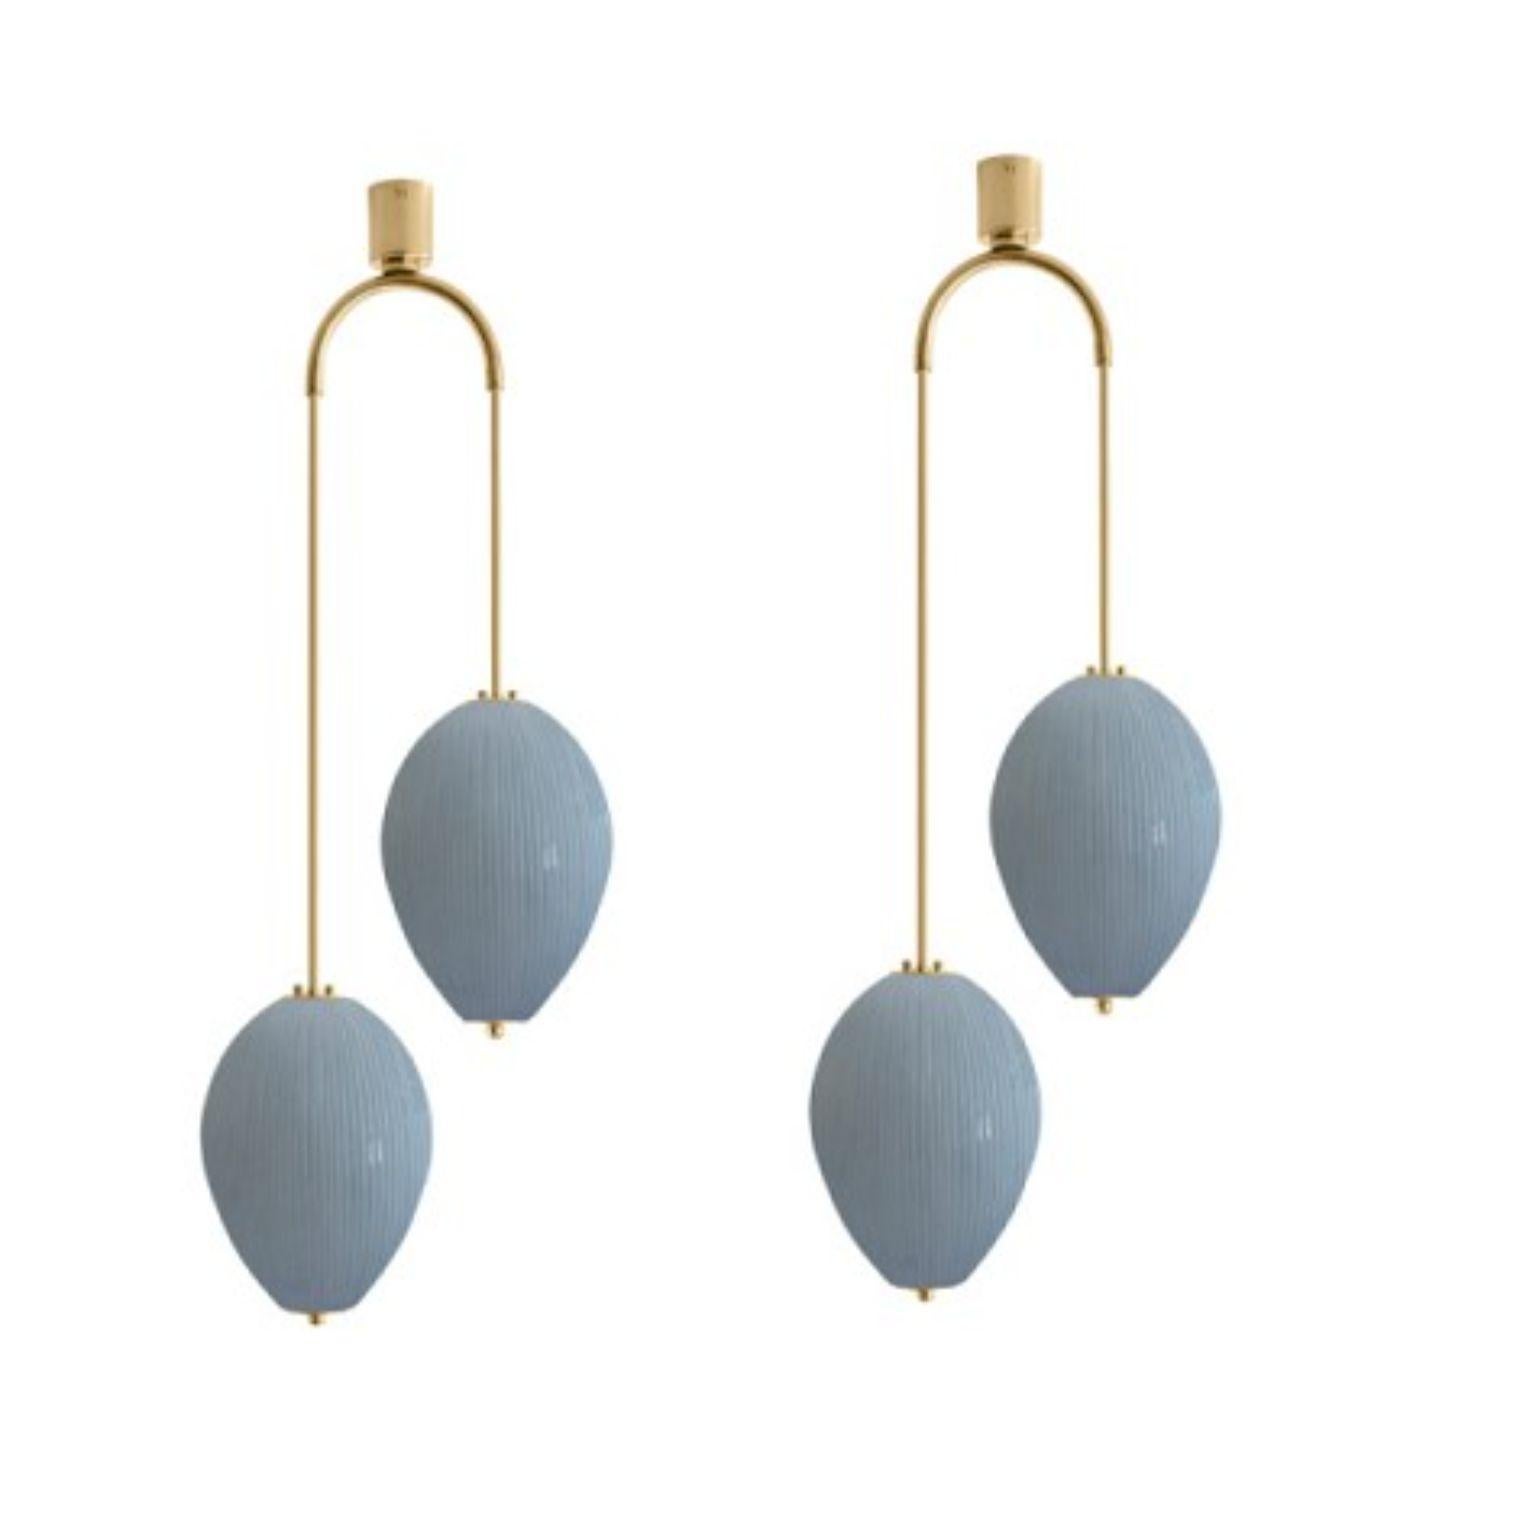 Double chandelier China 10 by Magic Circus Editions.
Dimensions: H 121.5 x W 44.3 x D 25.2 cm.
Materials: brass, mouth blown glass sculpted with a diamond saw.
Colour: opal grey.

Available finishes: brass, nickel.
Available colours: enamel